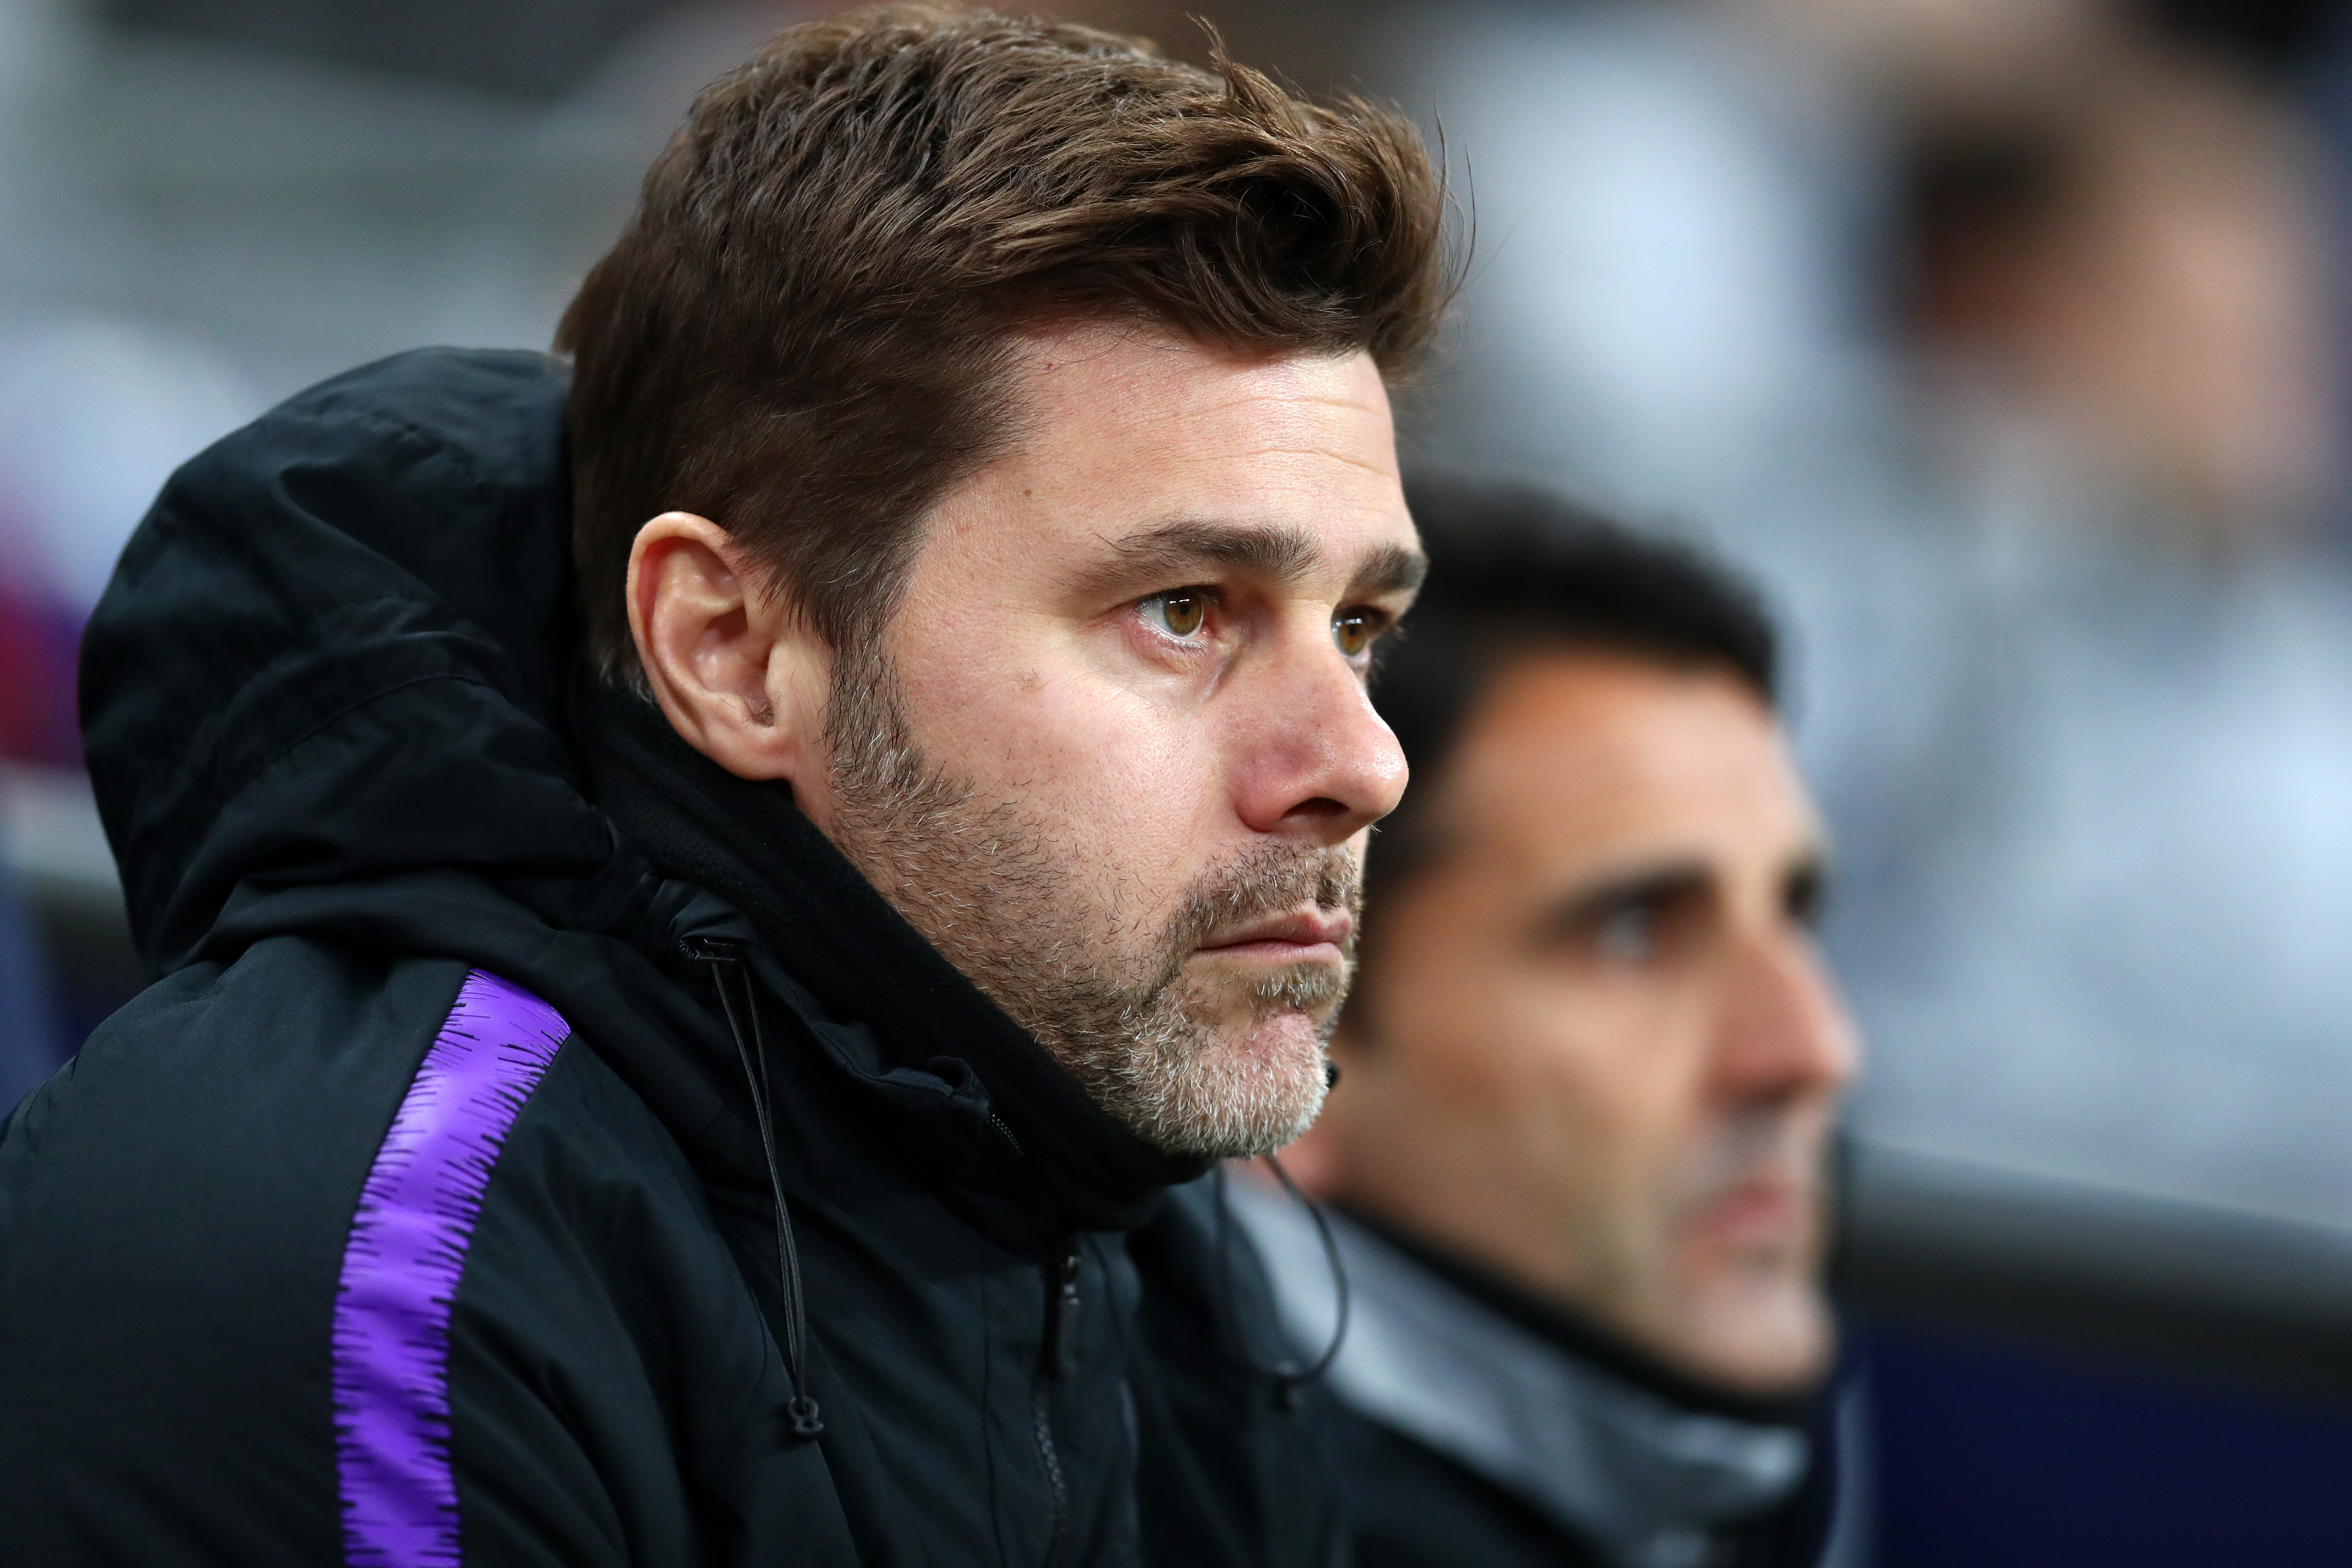 LONDON, ENGLAND - JANUARY 08: Mauricio Pochettino, Manager of Tottenham Hotspur looks on prior to the Carabao Cup Semi-Final First Leg match between Tottenham Hotspur and Chelsea at Wembley Stadium on January 8, 2019 in London, England.  (Photo by Clive Rose/Getty Images)